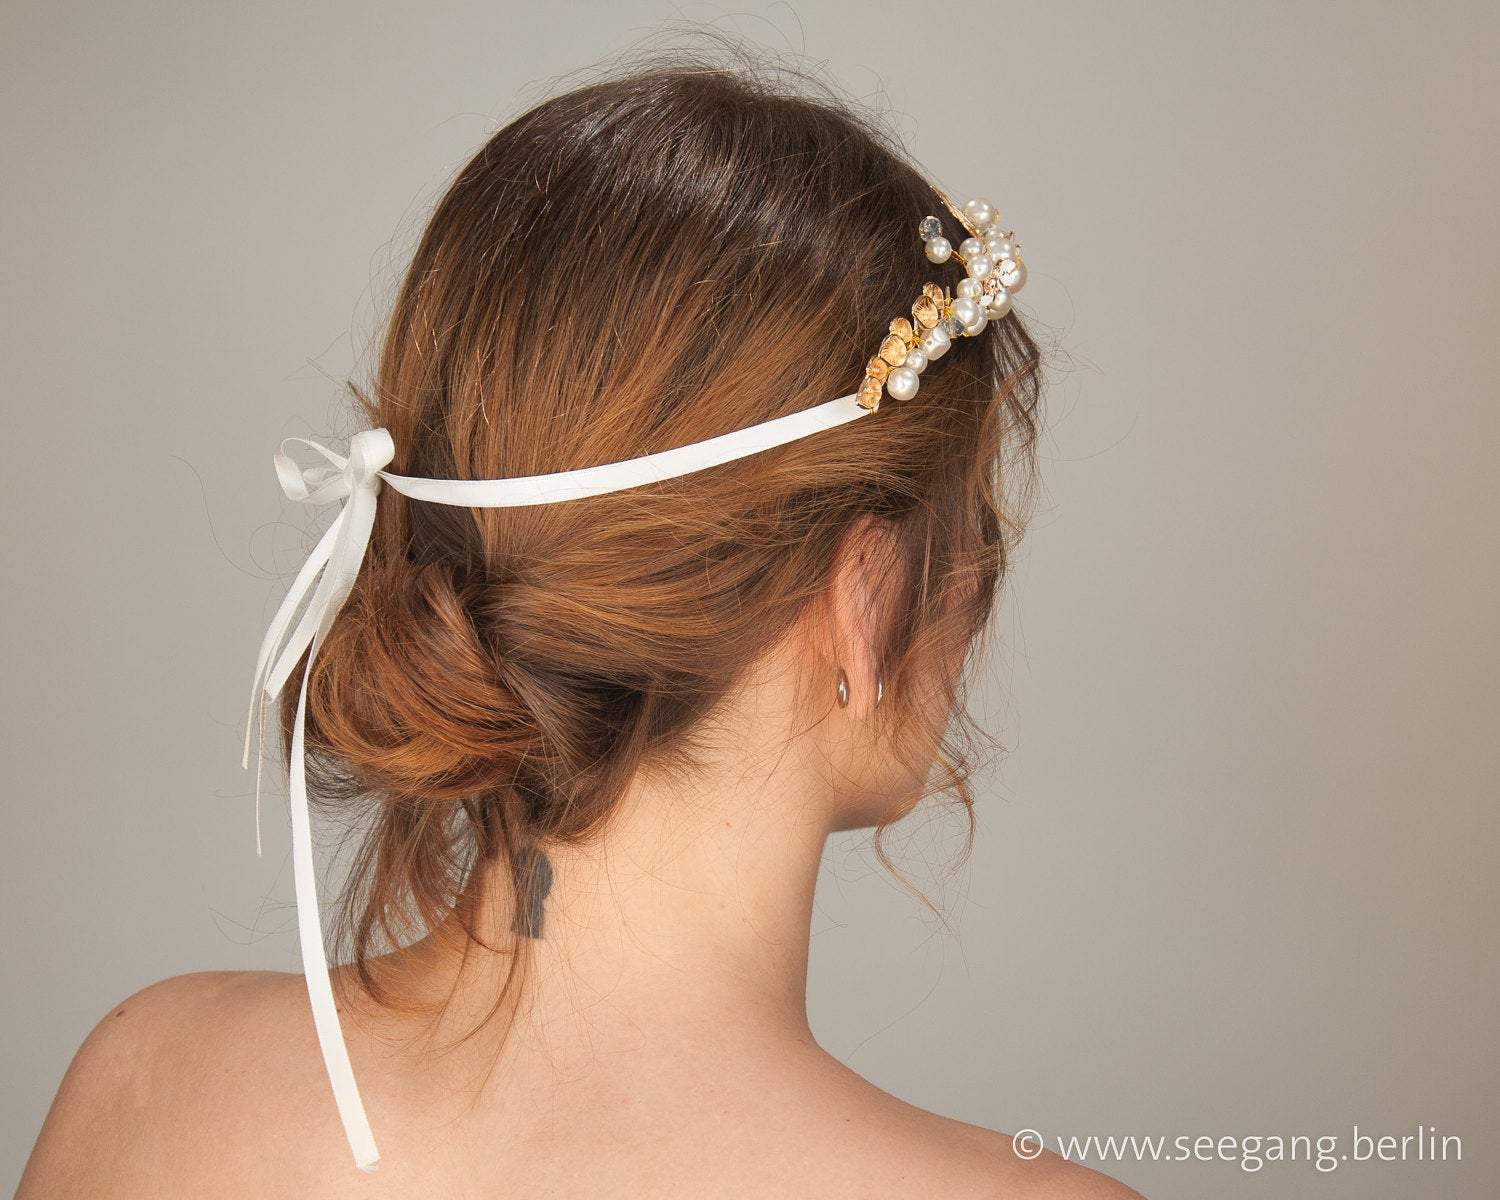 HAIRBAND - BRIDAL JEWELLERY WITH PEARLS AND LEAFS IN CREAM AND GOLDEN COLOUR © Seegang Berlin